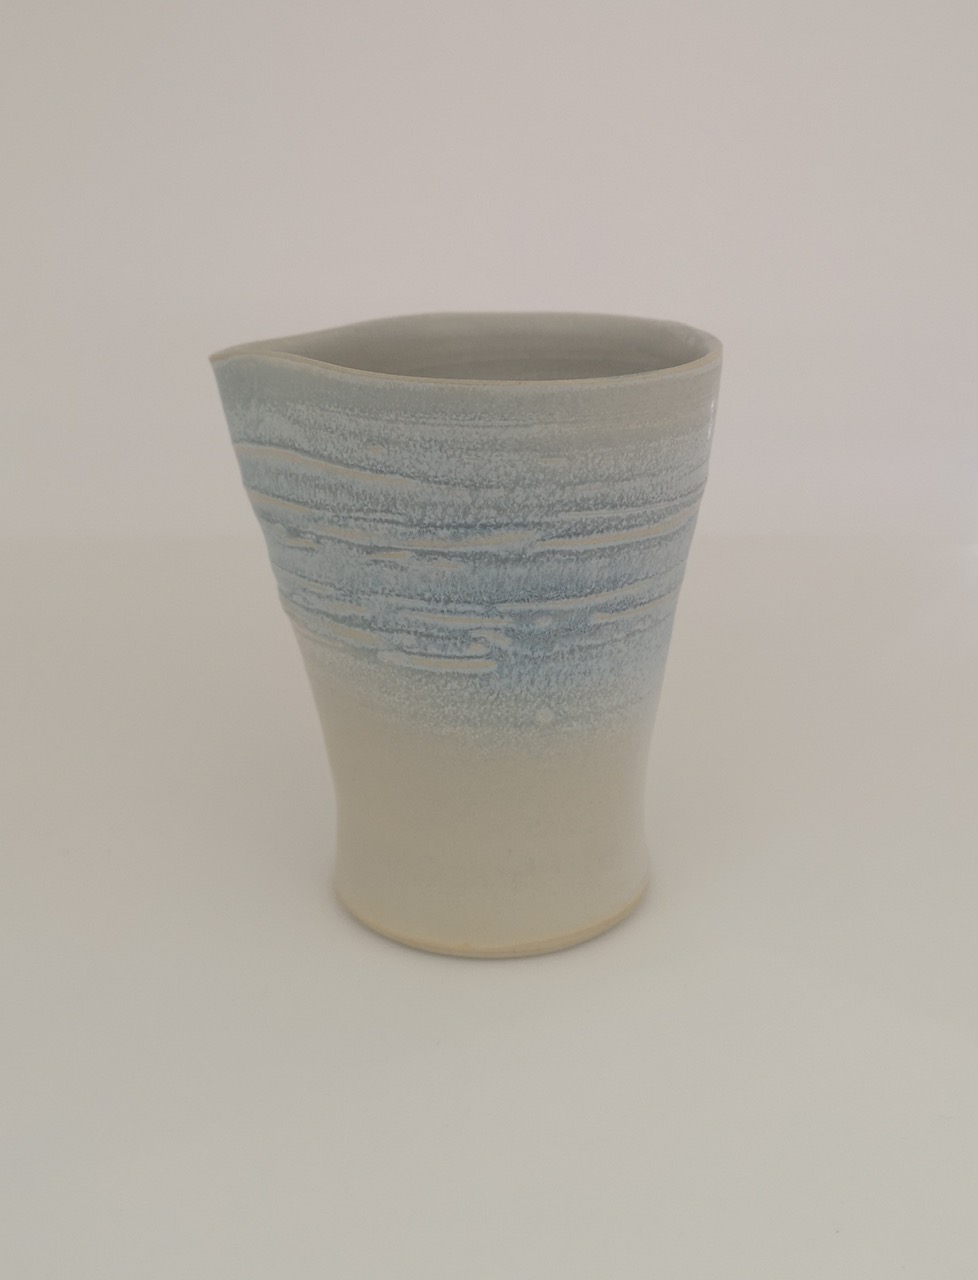 south lissens pottery at Logie Steading Gallery